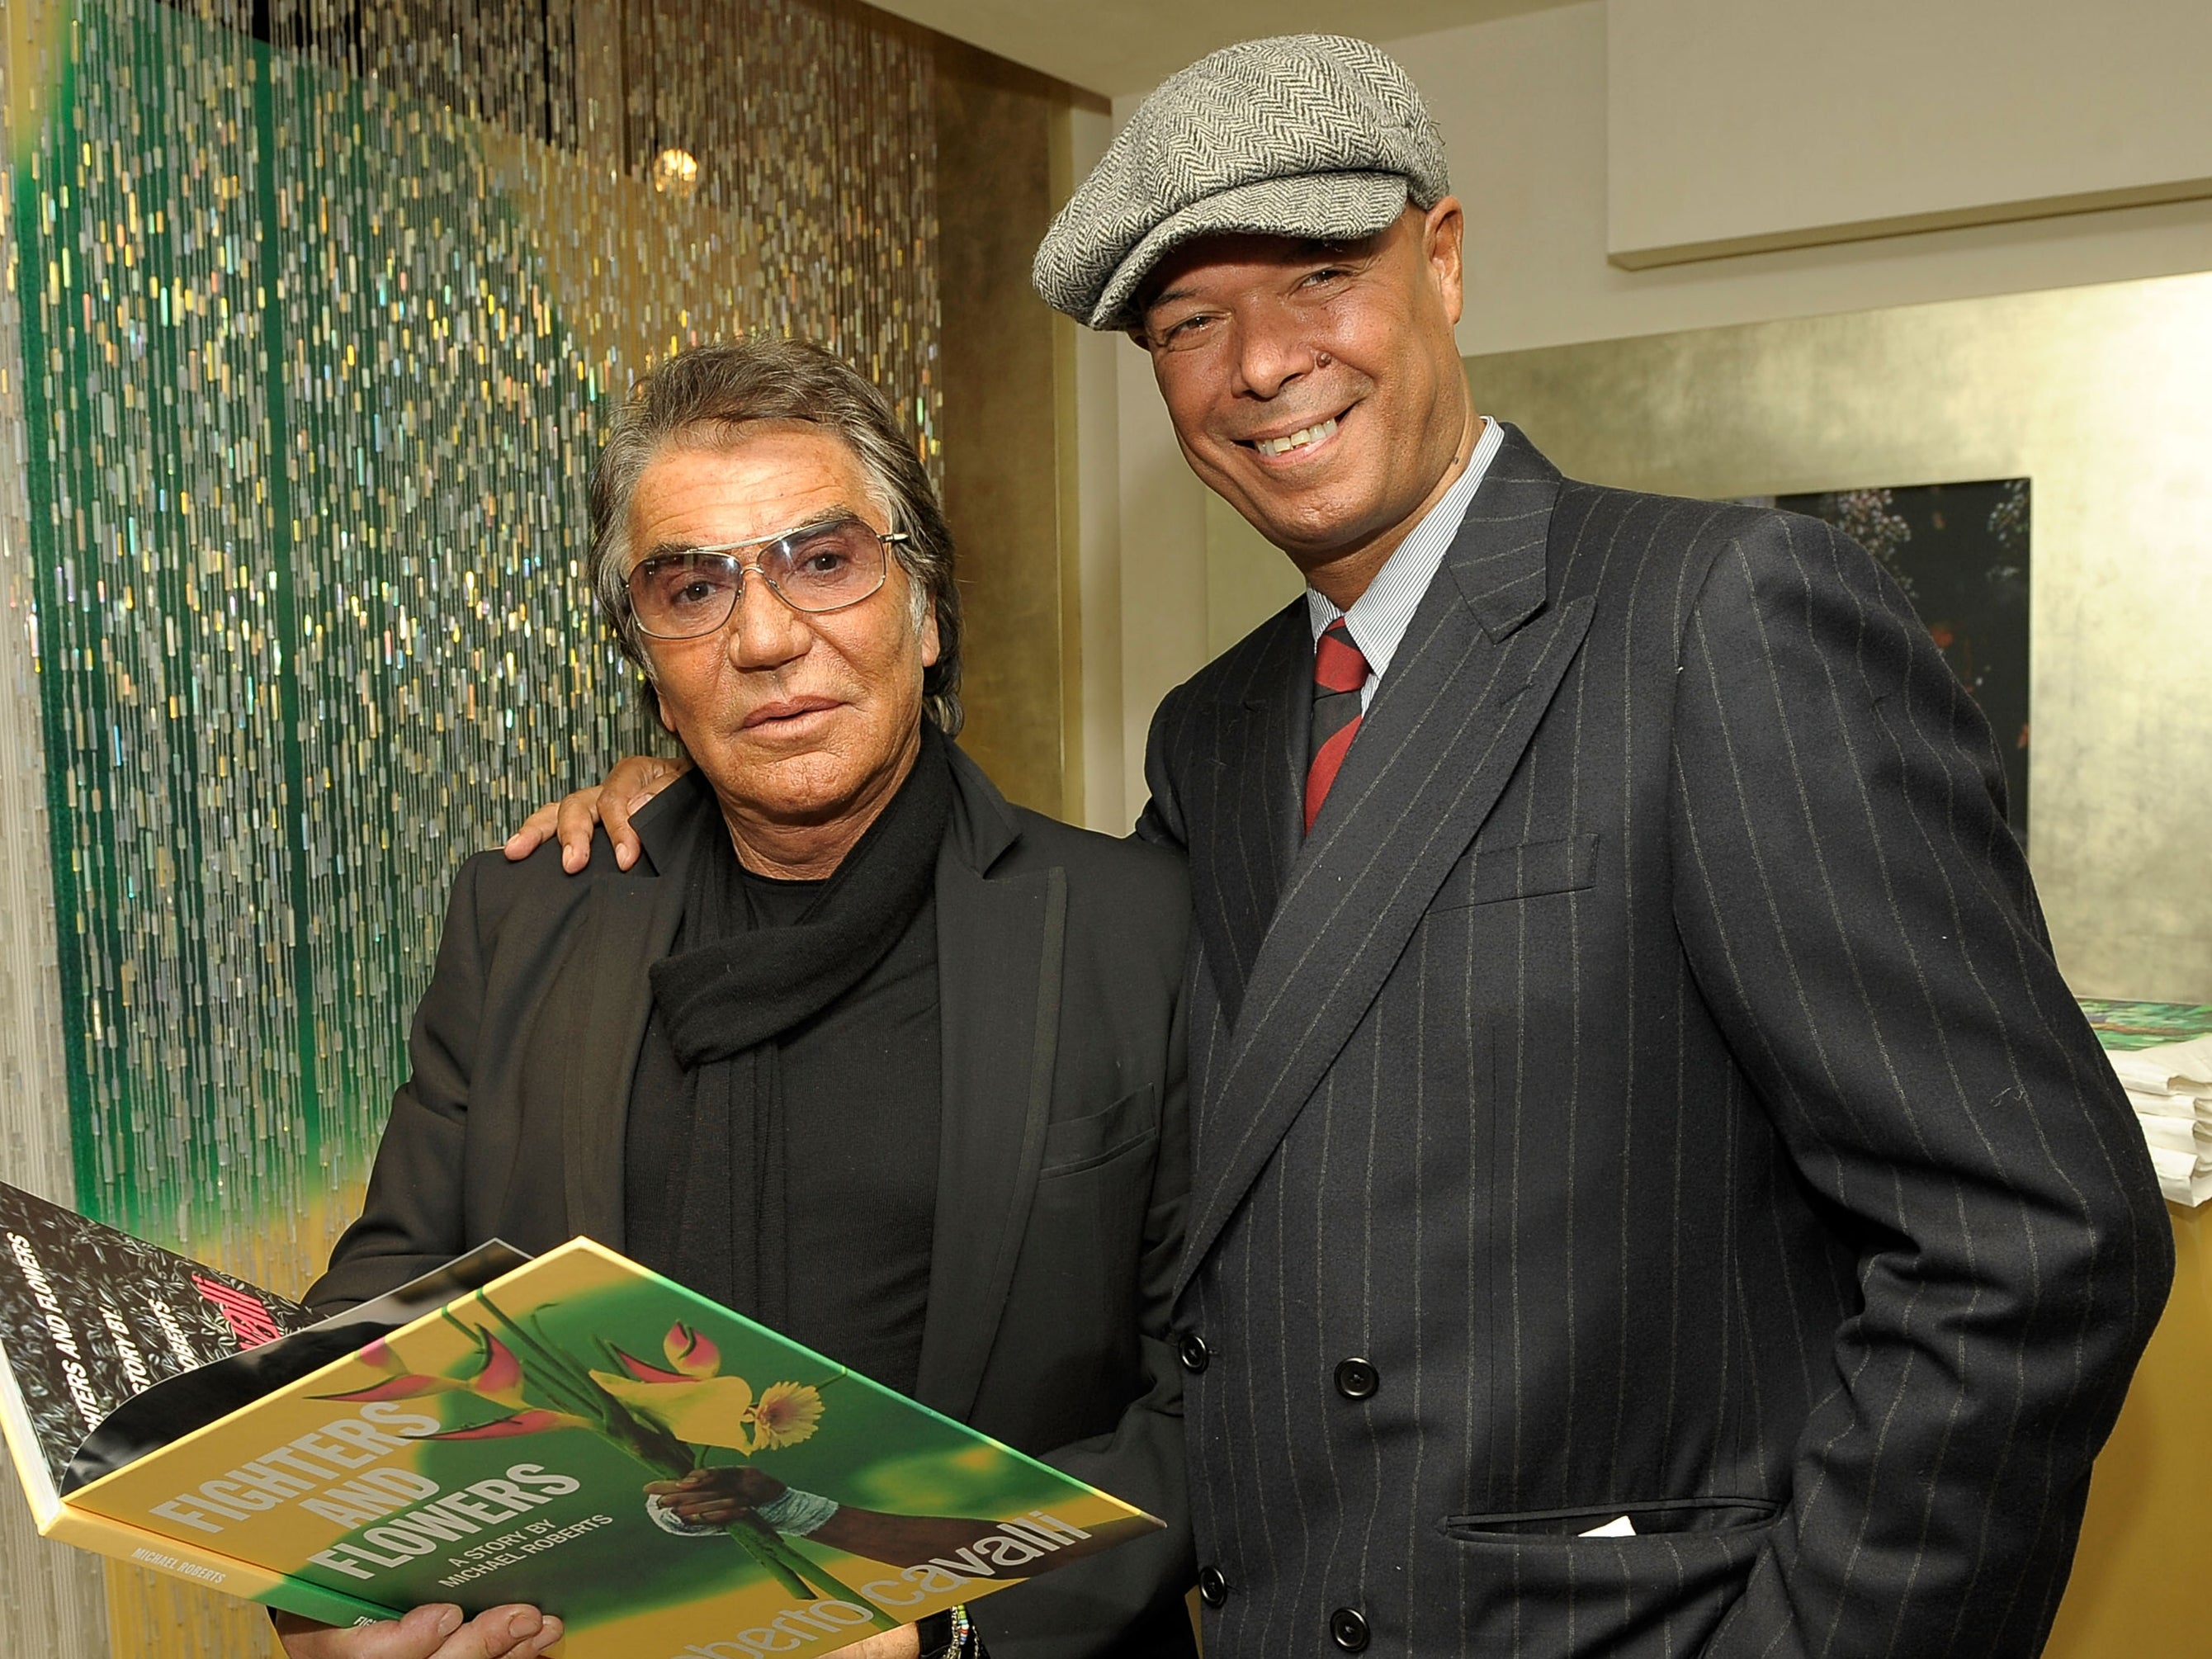 Michael Roberts (right) with Roberto Cavalli in 2009